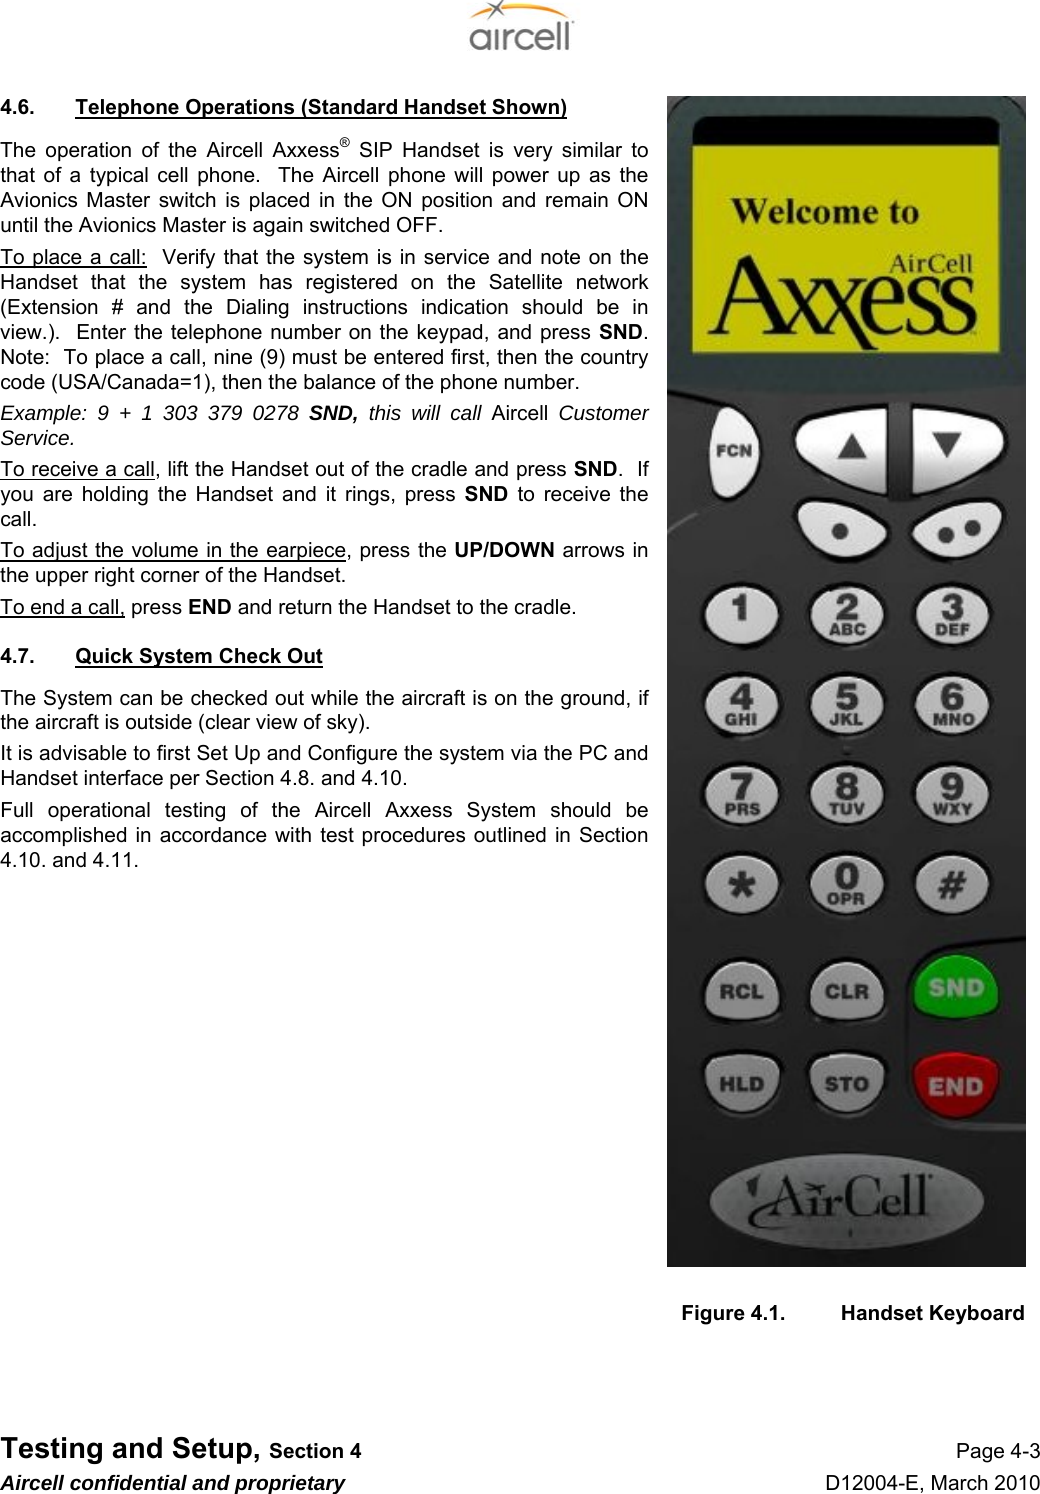  Testing and Setup, Section 4 Page 4-3 Aircell confidential and proprietary D12004-E, March 2010 4.6.  Telephone Operations (Standard Handset Shown) The operation of the Aircell Axxess® SIP Handset is very similar to that of a typical cell phone.  The Aircell phone will power up as the Avionics Master switch is placed in the ON position and remain ON until the Avionics Master is again switched OFF. To place a call:  Verify that the system is in service and note on the Handset that the system has registered on the Satellite network (Extension # and the Dialing instructions indication should be in view.).  Enter the telephone number on the keypad, and press SND.  Note:  To place a call, nine (9) must be entered first, then the country code (USA/Canada=1), then the balance of the phone number. Example: 9 + 1 303 379 0278 SND,  this will call Aircell Customer Service. To receive a call, lift the Handset out of the cradle and press SND.  If you are holding the Handset and it rings, press SND to receive the call. To adjust the volume in the earpiece, press the UP/DOWN arrows in the upper right corner of the Handset. To end a call, press END and return the Handset to the cradle. 4.7.  Quick System Check Out The System can be checked out while the aircraft is on the ground, if the aircraft is outside (clear view of sky). It is advisable to first Set Up and Configure the system via the PC and Handset interface per Section 4.8. and 4.10. Full operational testing of the Aircell Axxess System should be accomplished in accordance with test procedures outlined in Section 4.10. and 4.11.               Figure 4.1.  Handset Keyboard    